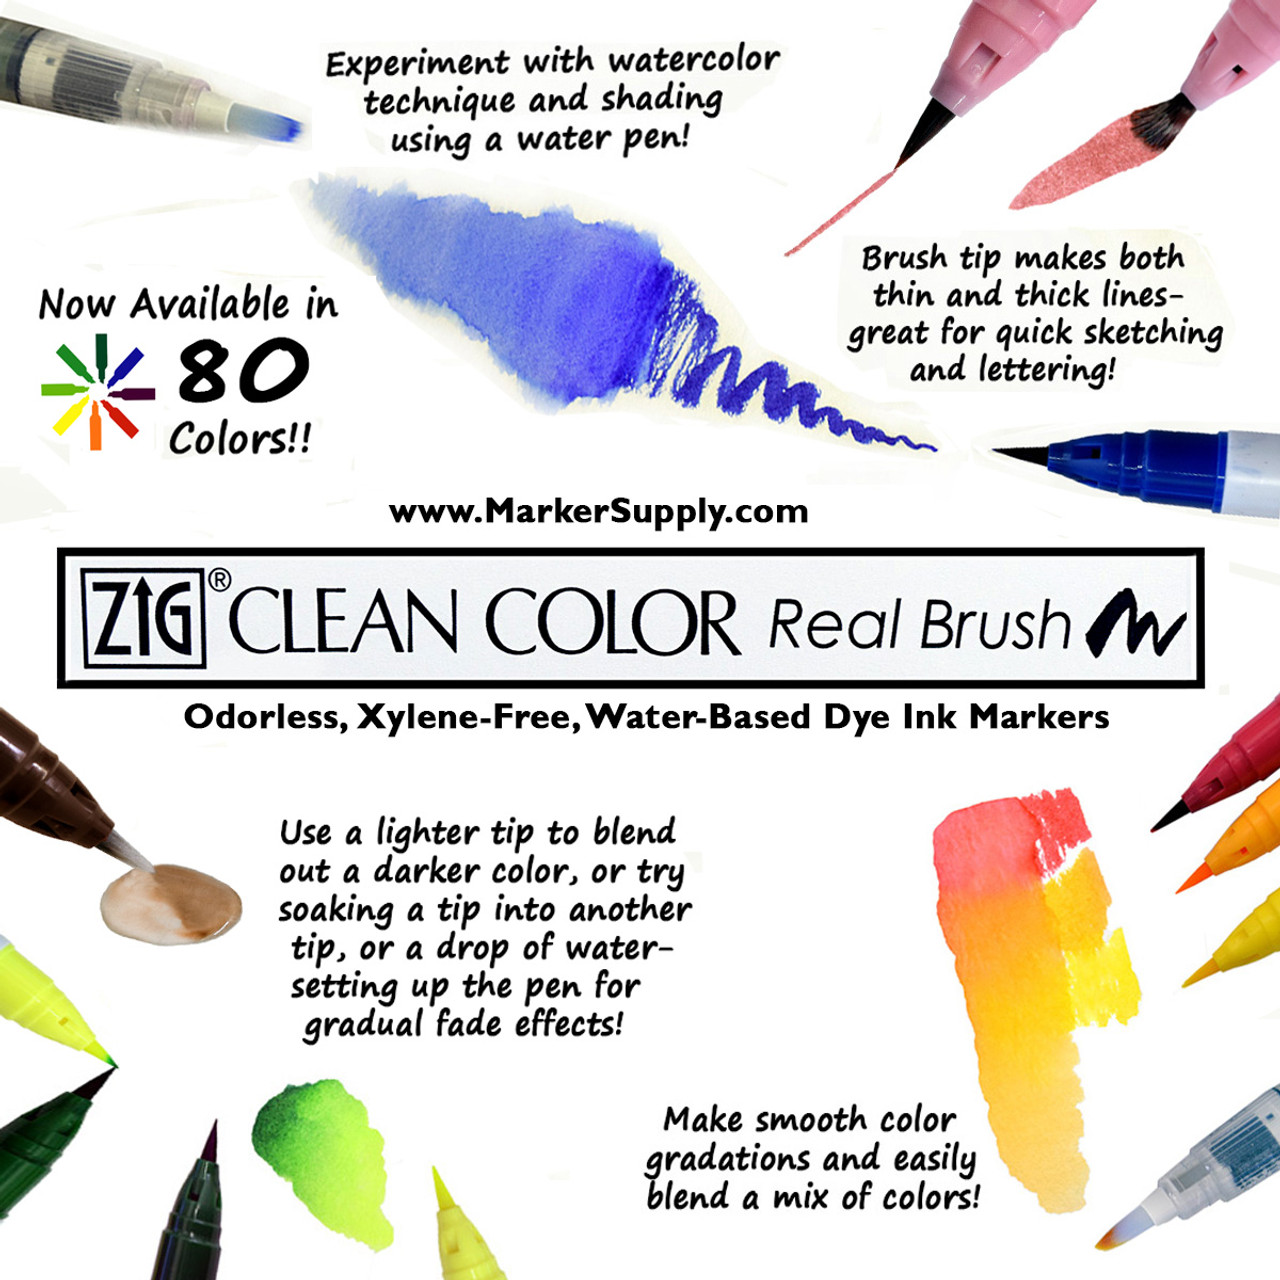 https://cdn11.bigcommerce.com/s-caae1tt33v/images/stencil/1280x1280/products/4439/8683/zig-clean-color-real-brush-marker-105__56358.1688591210.jpg?c=1